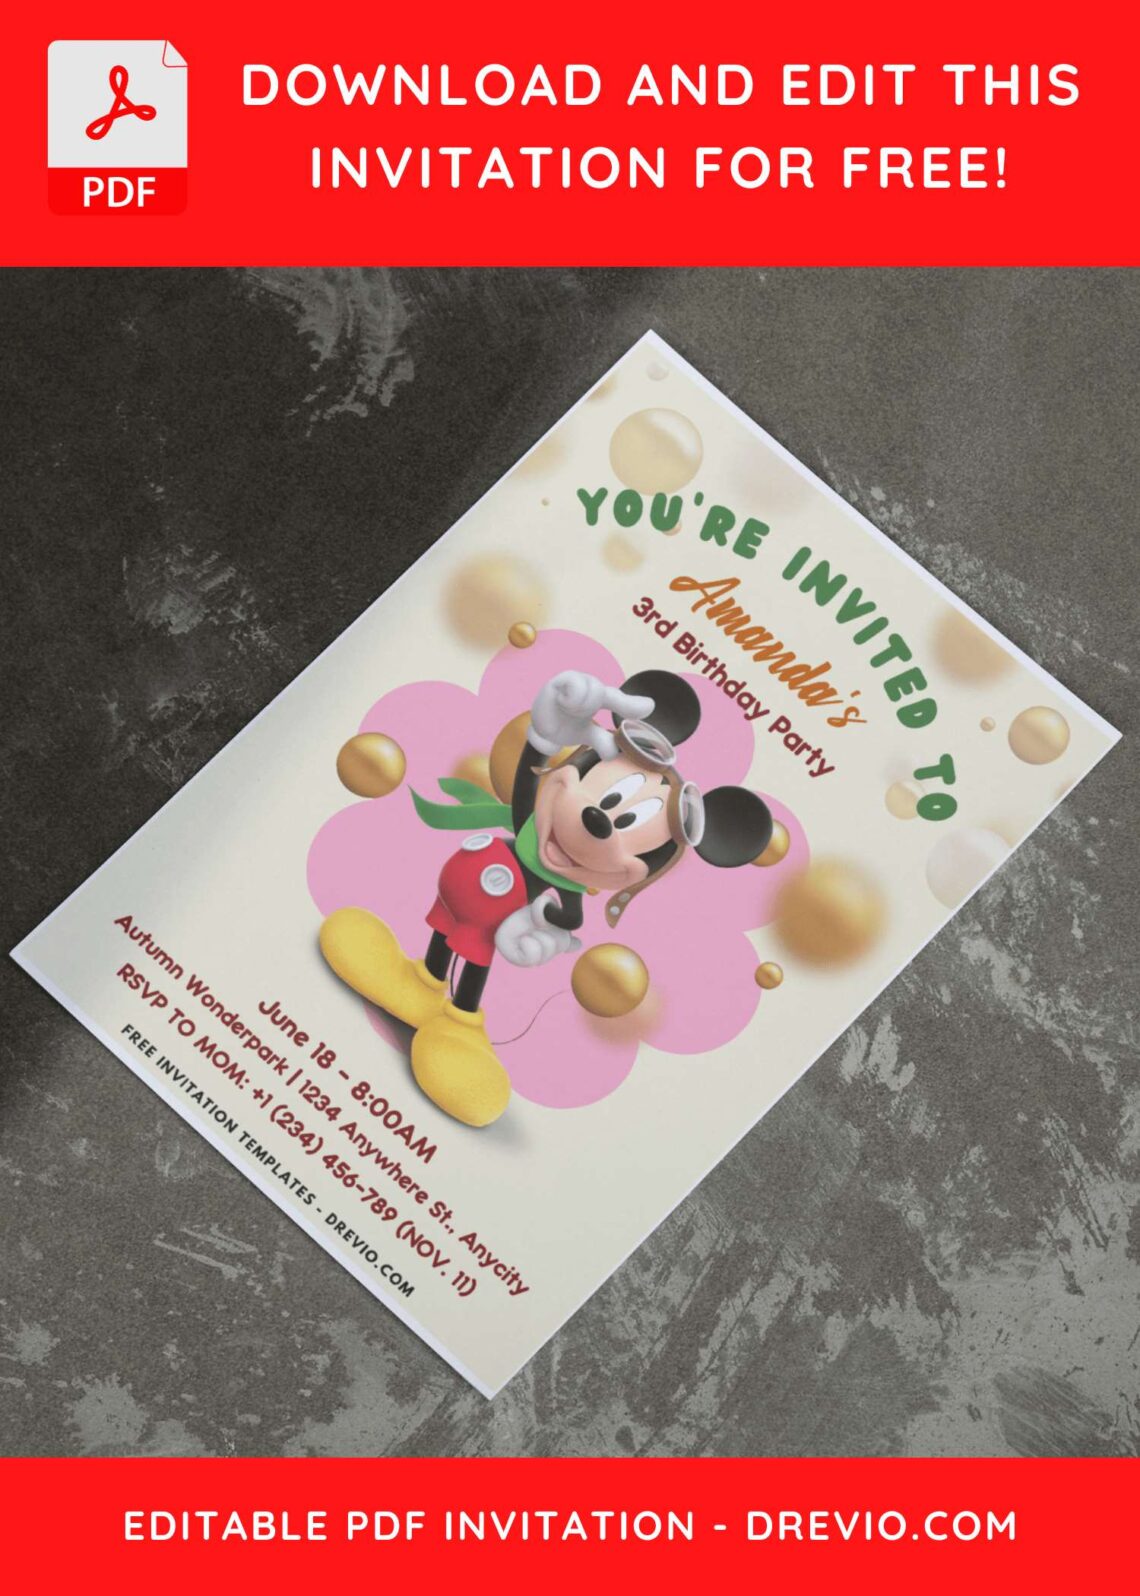 Mickey Mouse Invitation Templates For Fun And Enjoyable Kids' Parties I